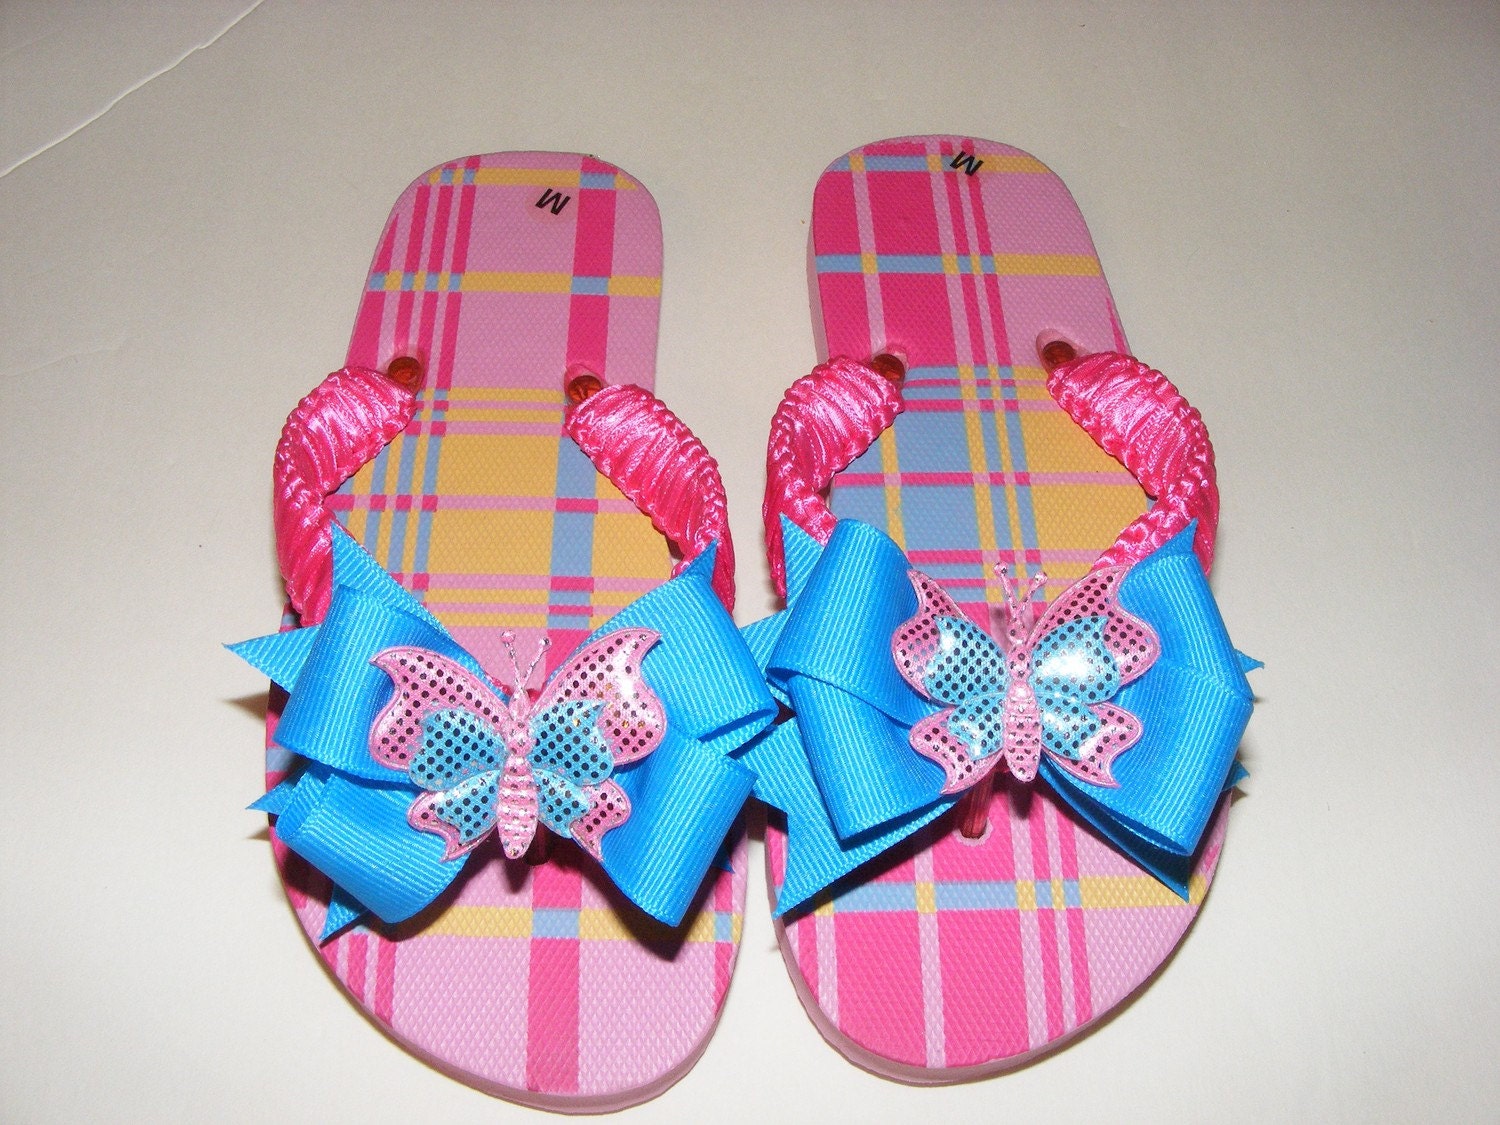 New Pink and Multicolor Plaids Flip Flops - Medium Girl Size 11/12